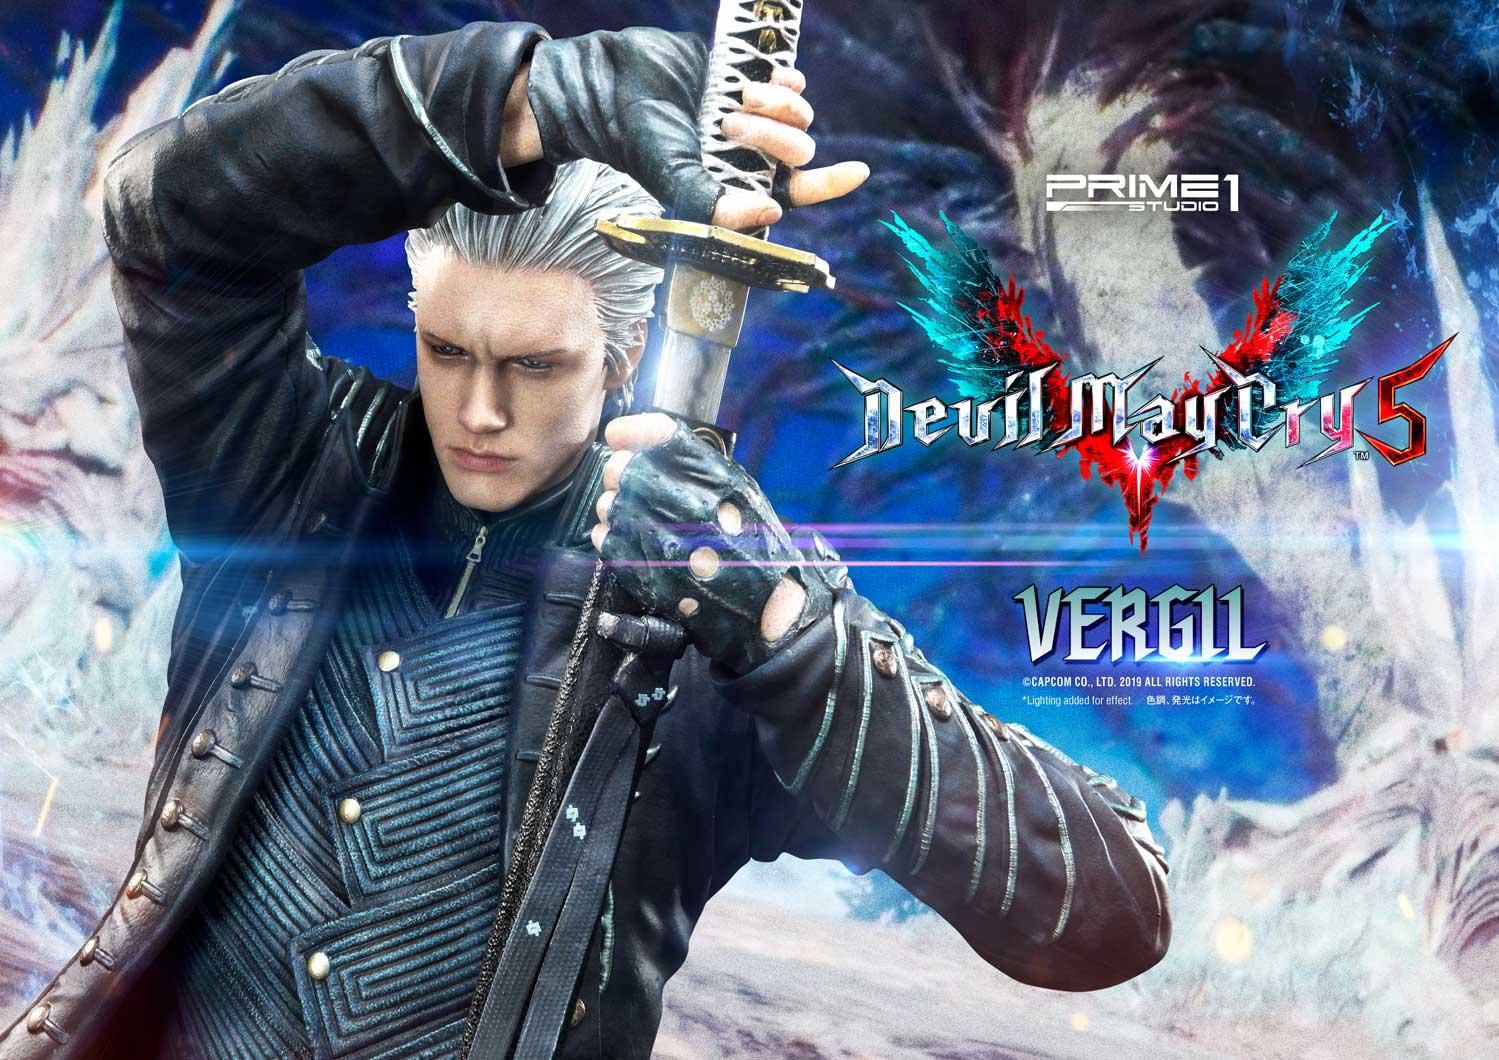 DEVIL MAY CRY 5 + VERGIL - PC - Buy it at Nuuvem